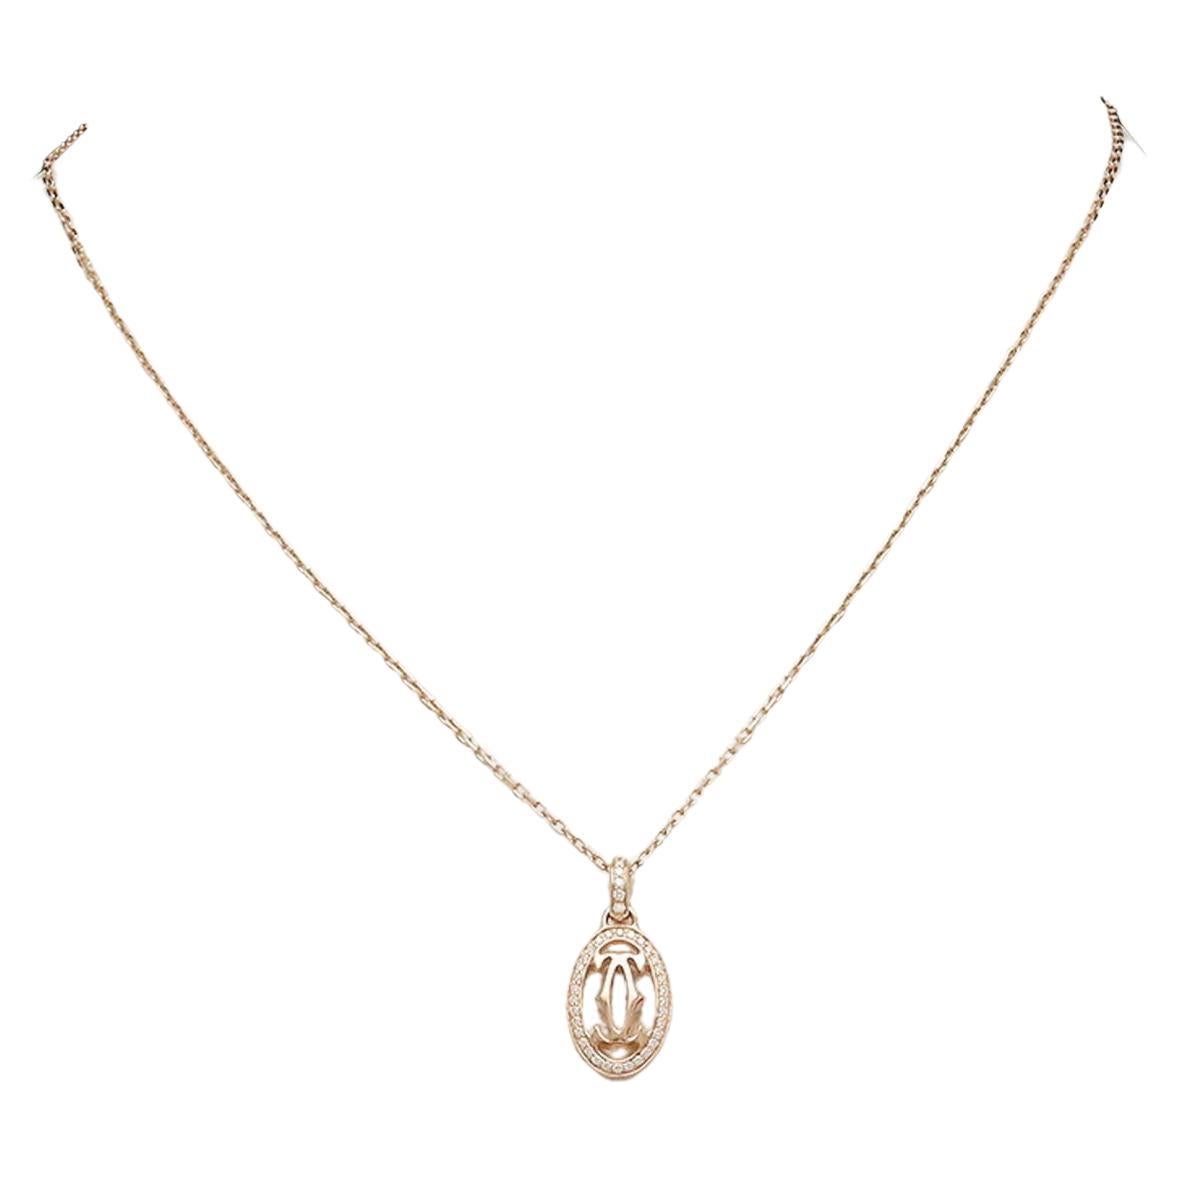 Cartier Double C Diamond Pendant Necklace in 18K Pink Gold